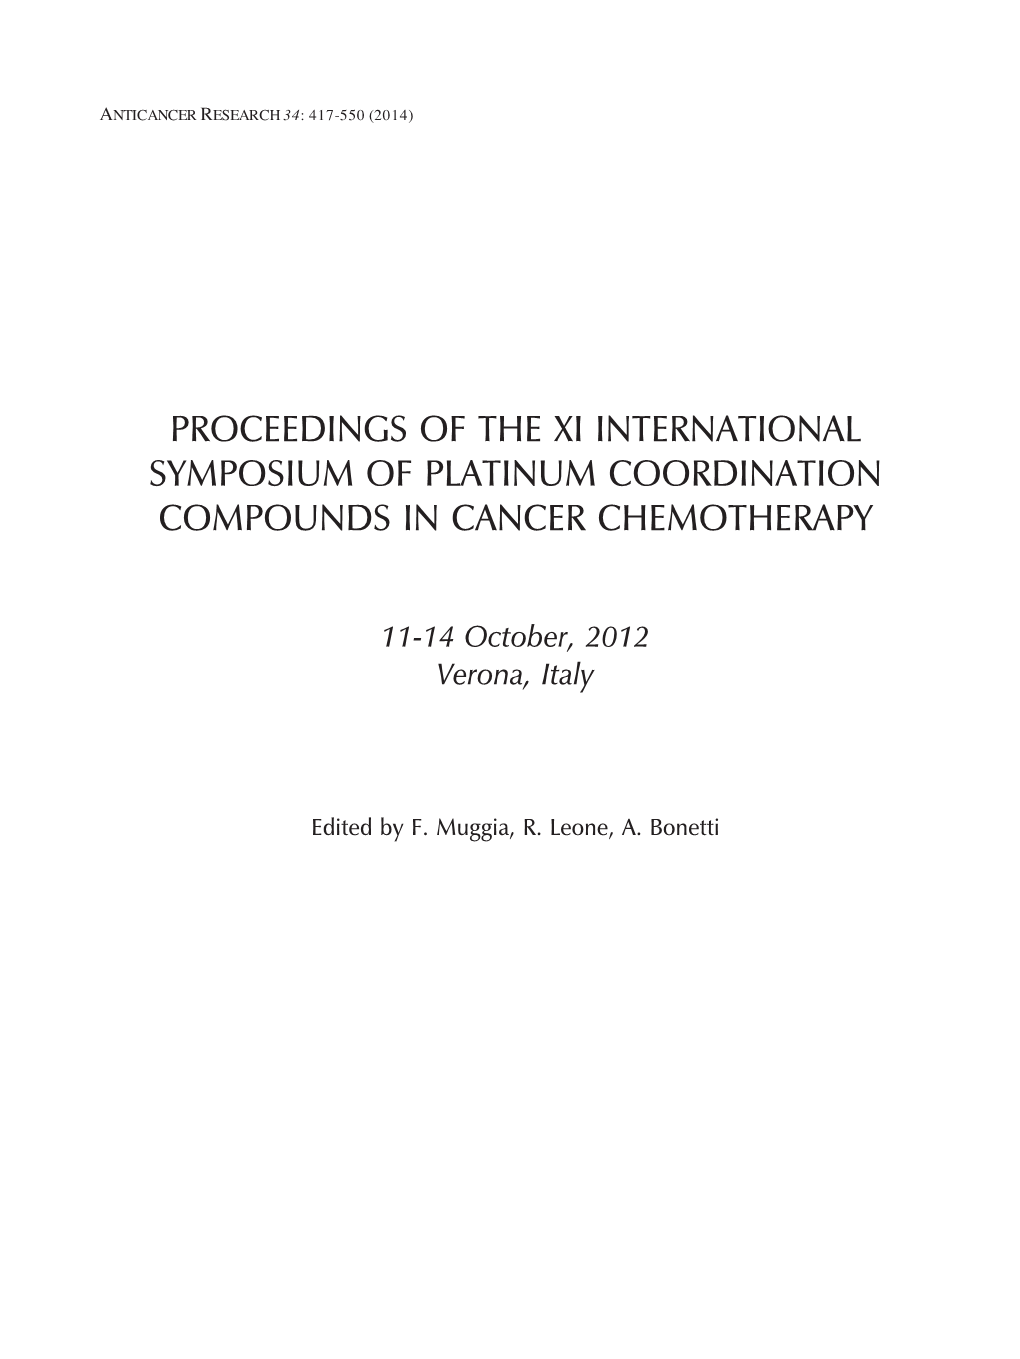 Proceedings of the Xi International Symposium of Platinum Coordination Compounds in Cancer Chemotherapy